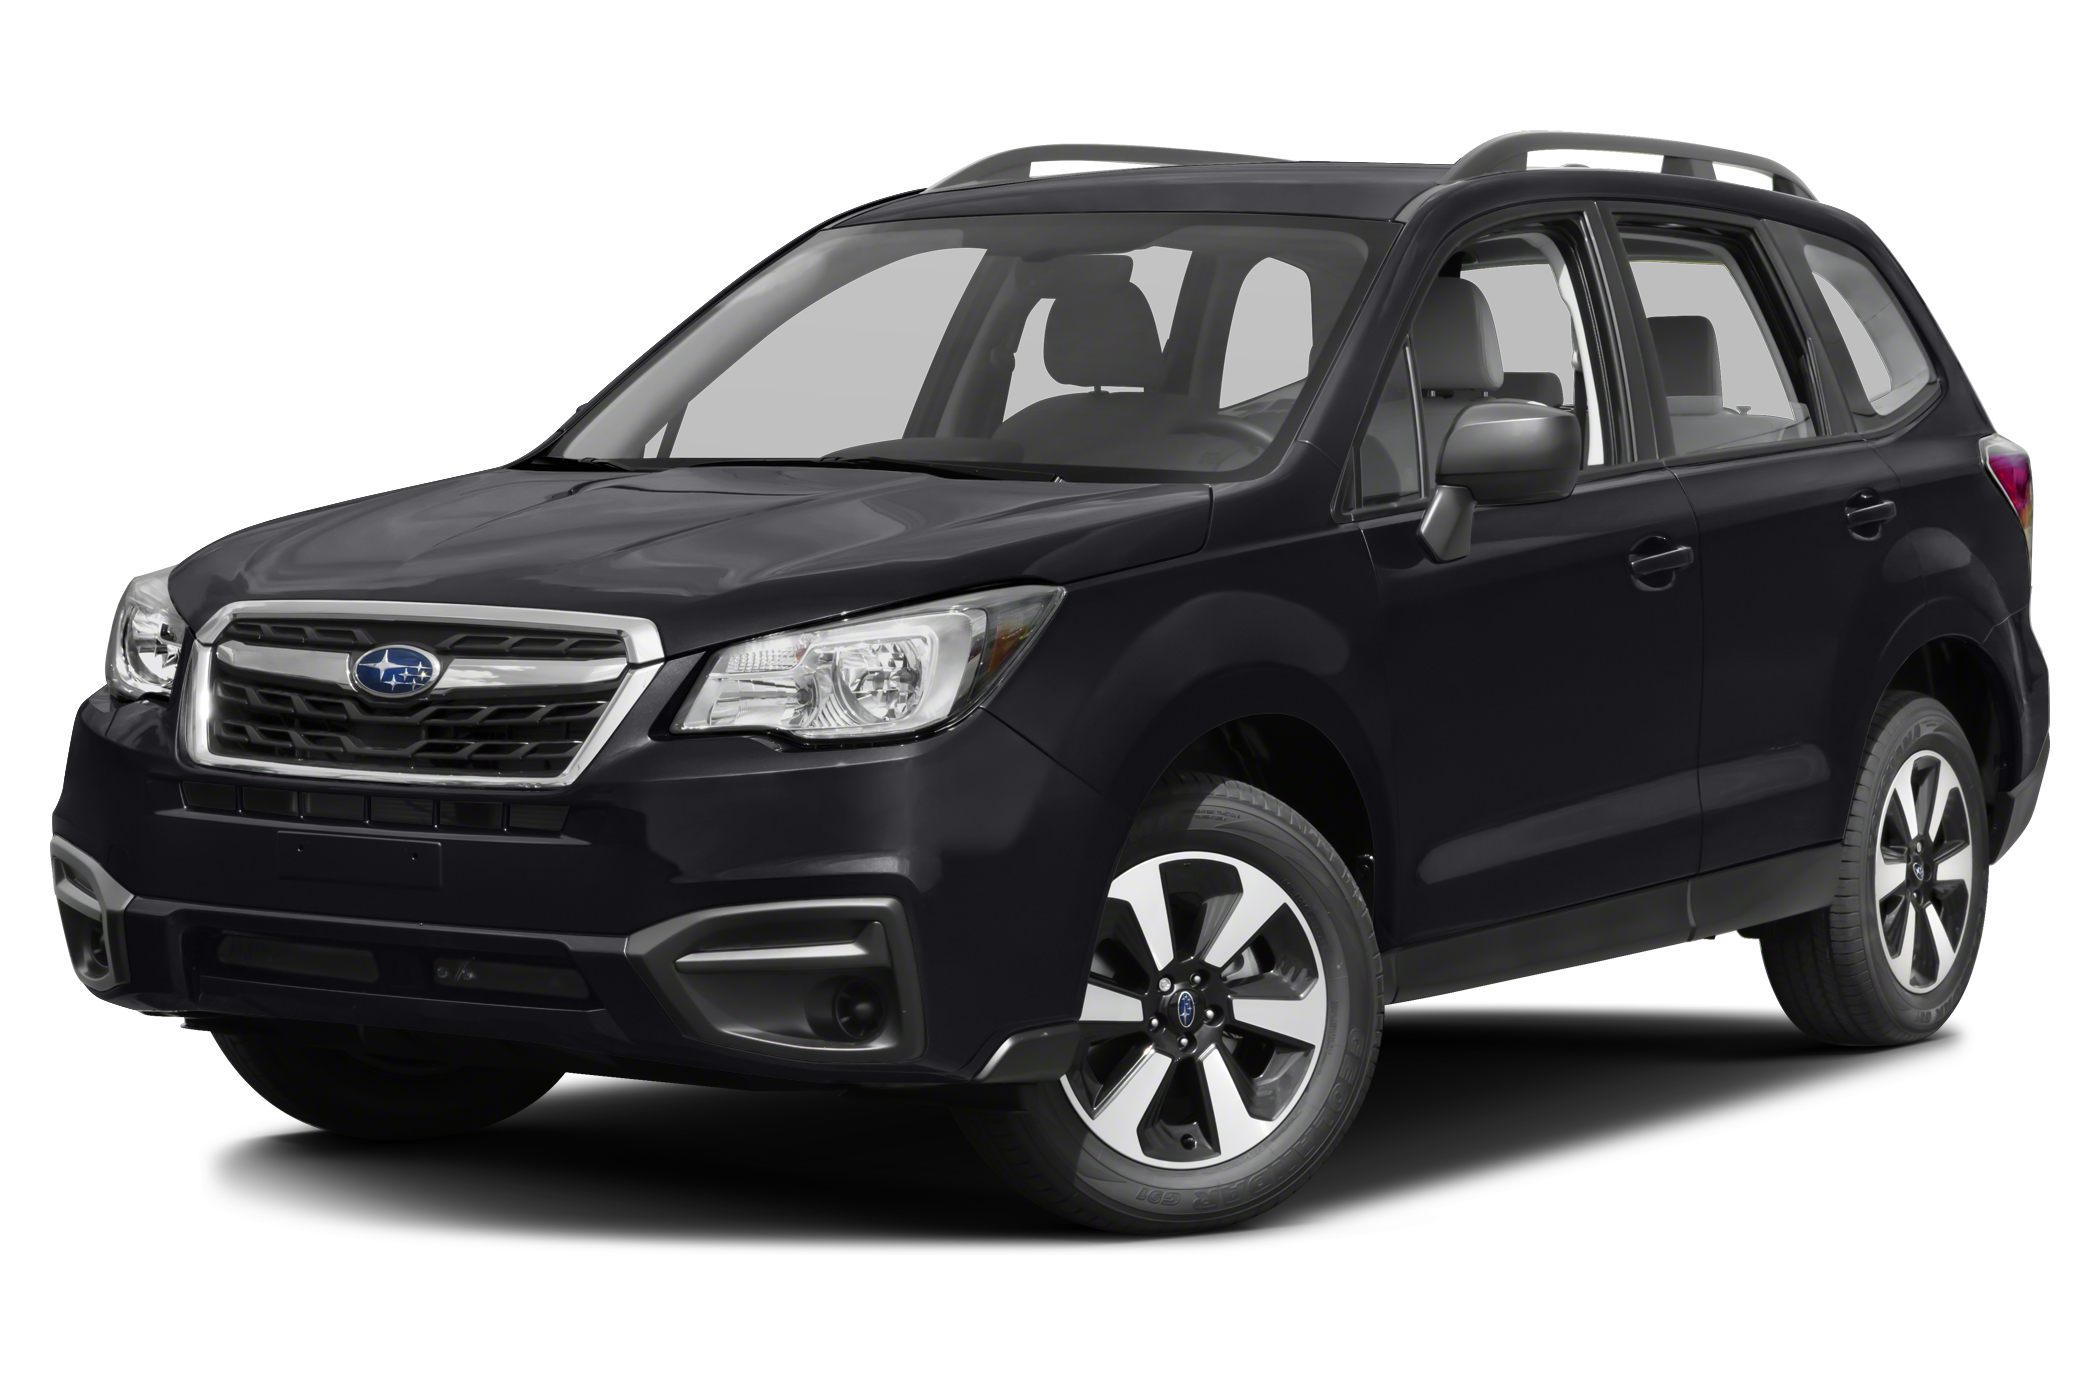 2100x1386 > Subaru Forester Wallpapers